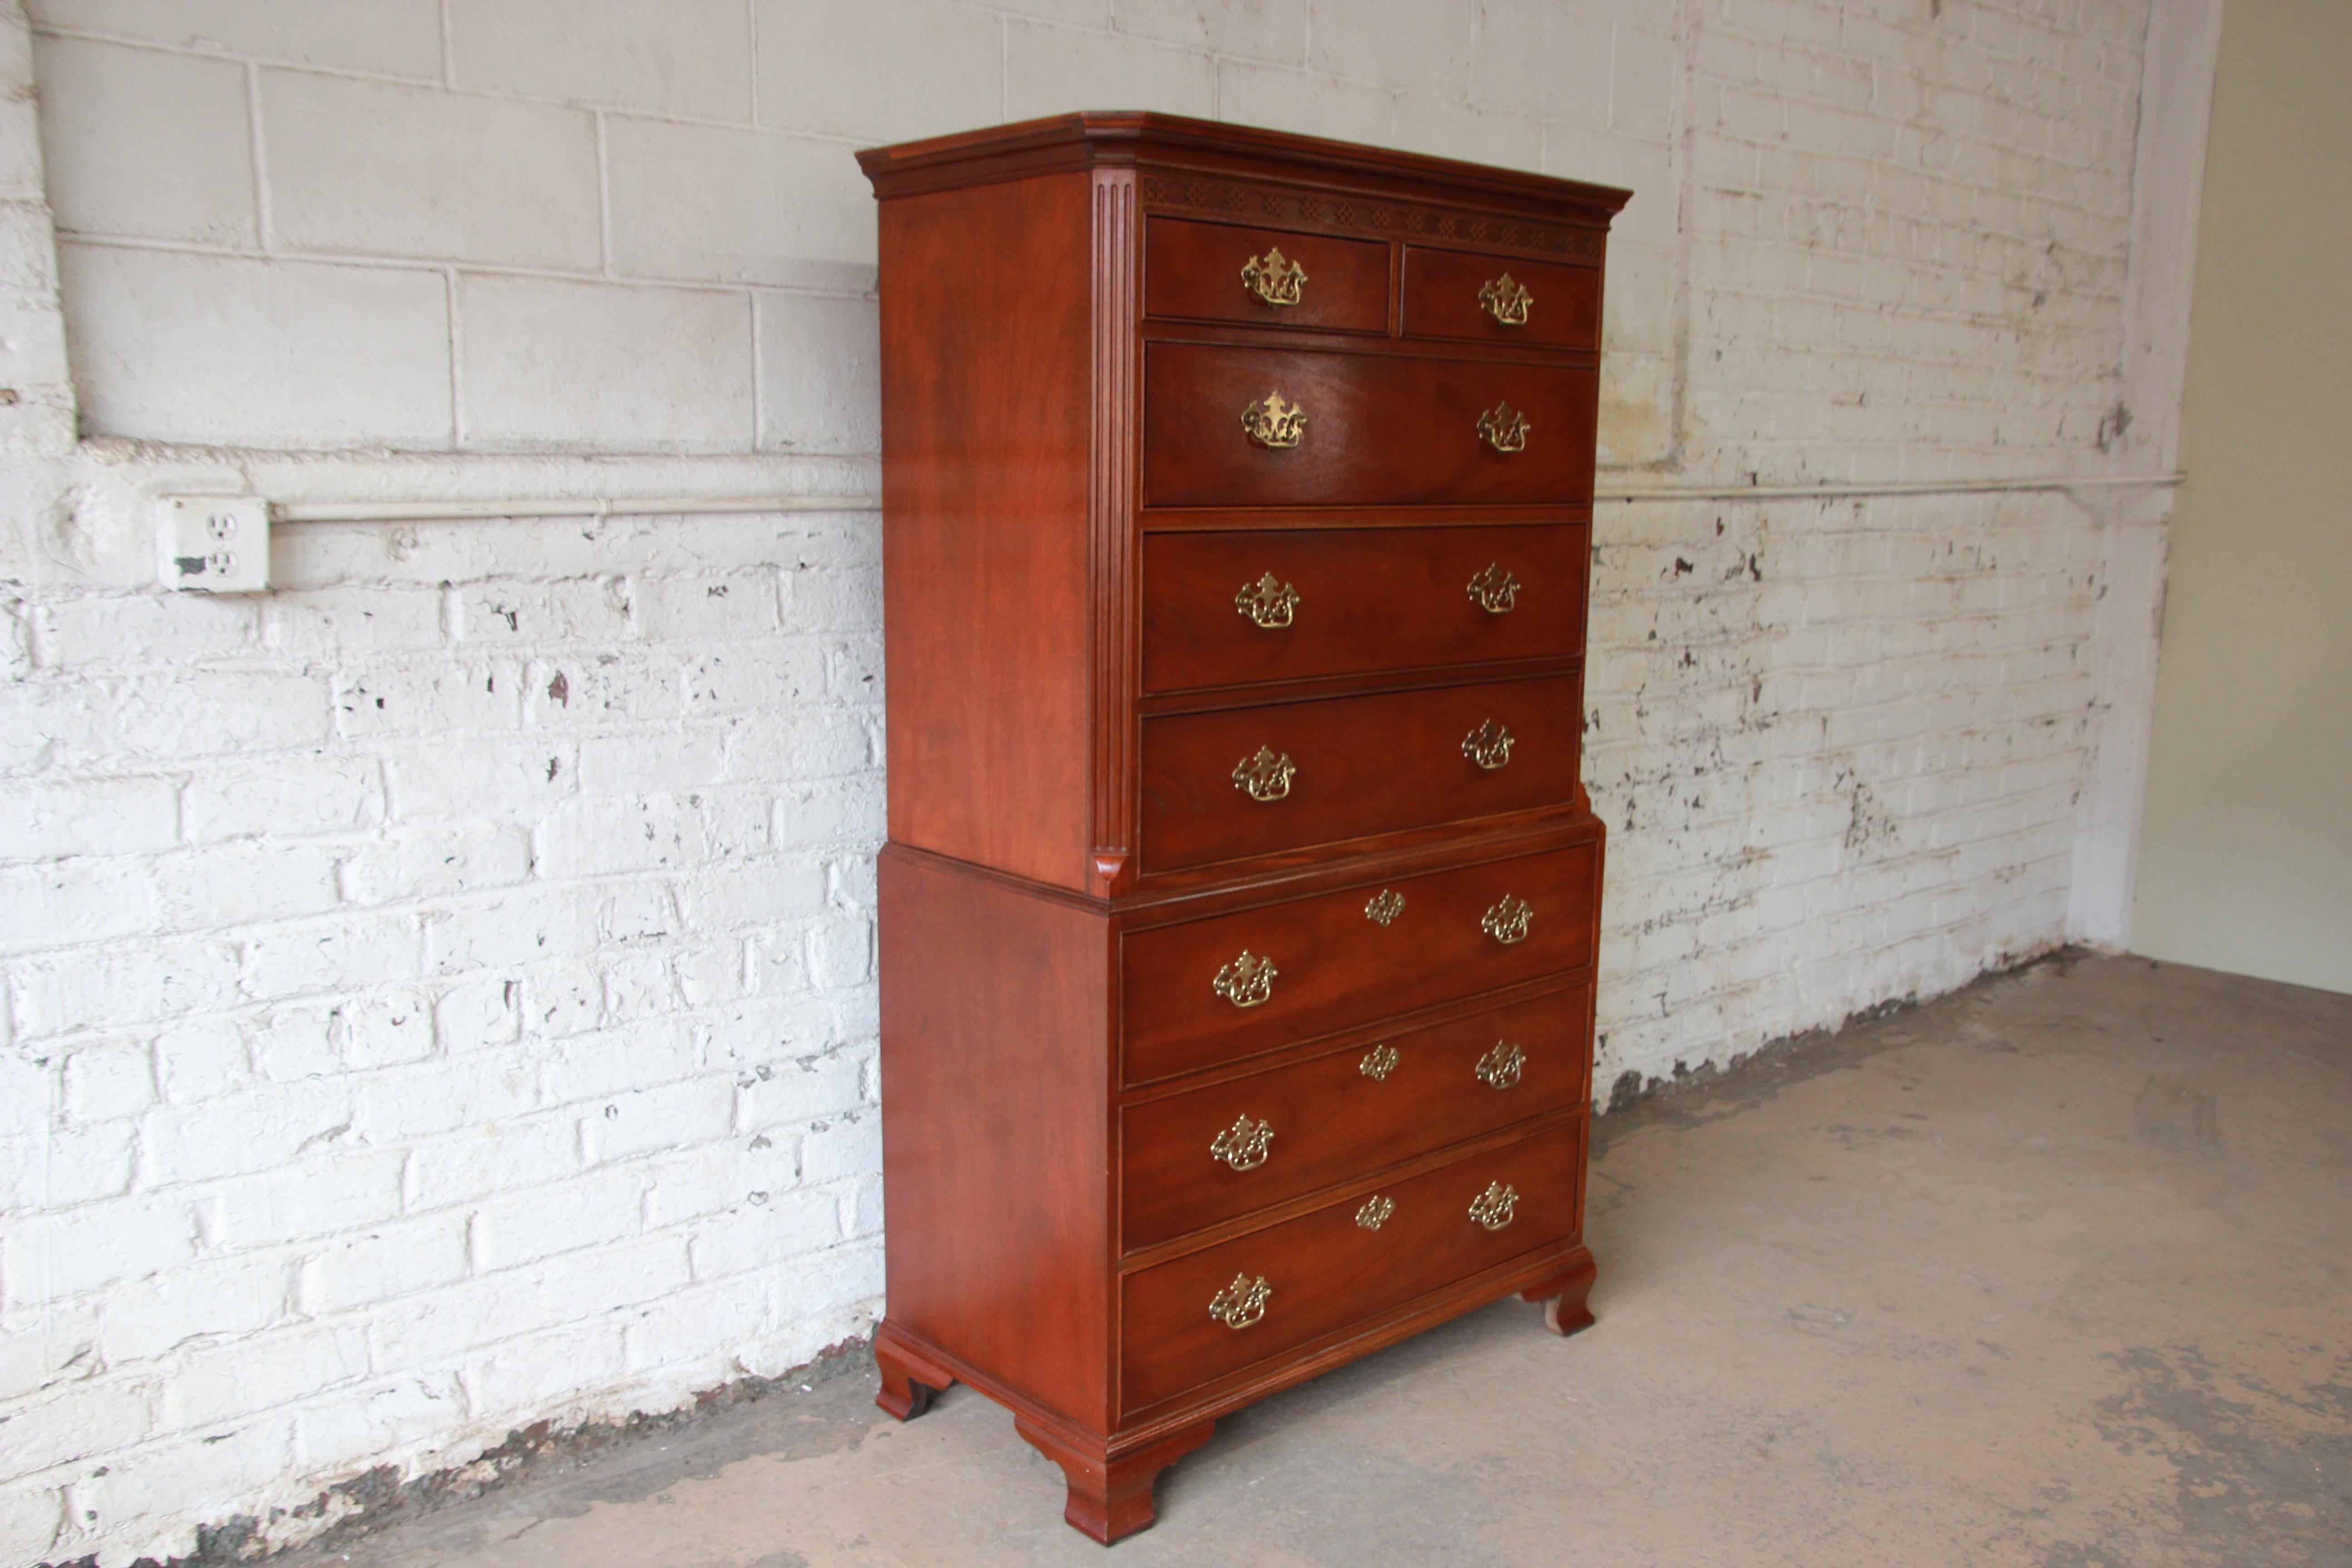 Chippendale style mahogany chest on chest dresser by Baker Furniture Company. The chest features gorgeous mahogany wood grain and a nice traditional style. It offers ample room for storage, with eight dovetailed drawers. The dresser is built from